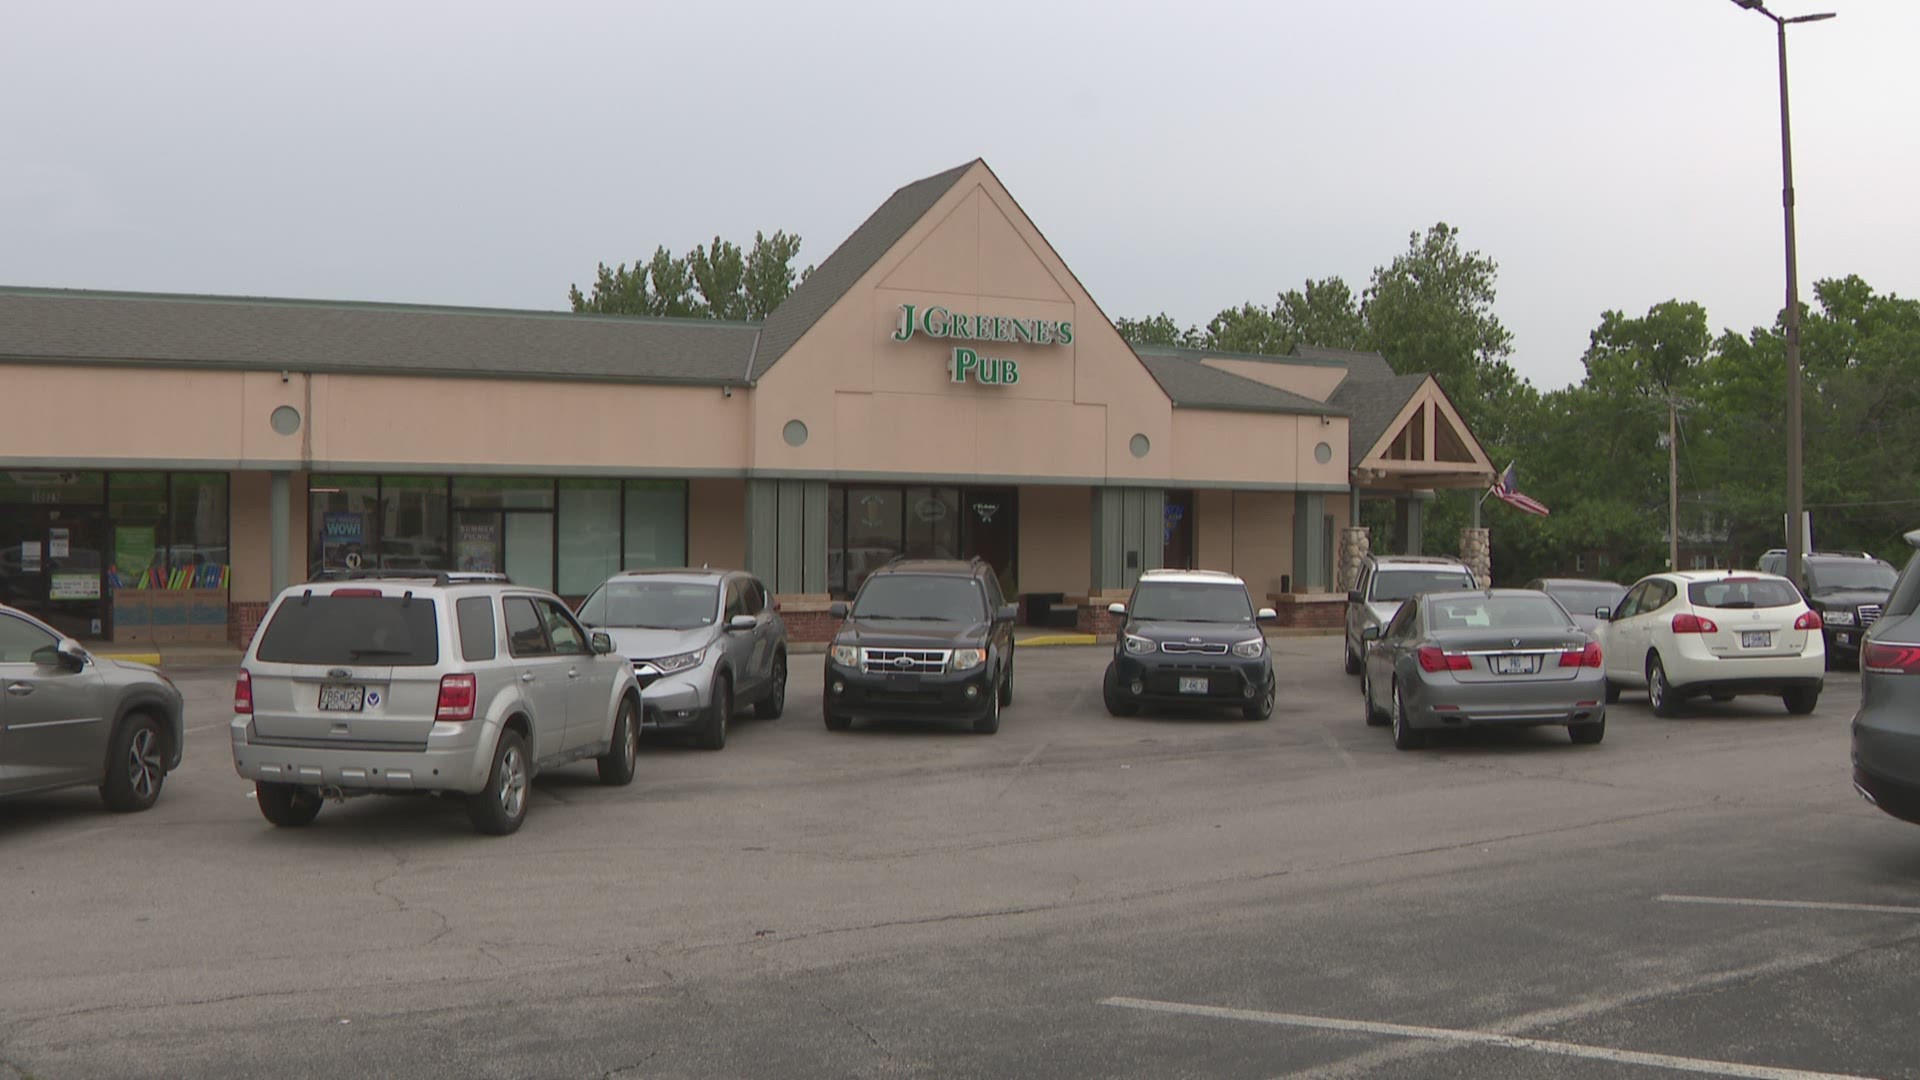 J Greene’s Irish Pub, located at 10017 Manchester Road, made the announcement Wednesday on social media